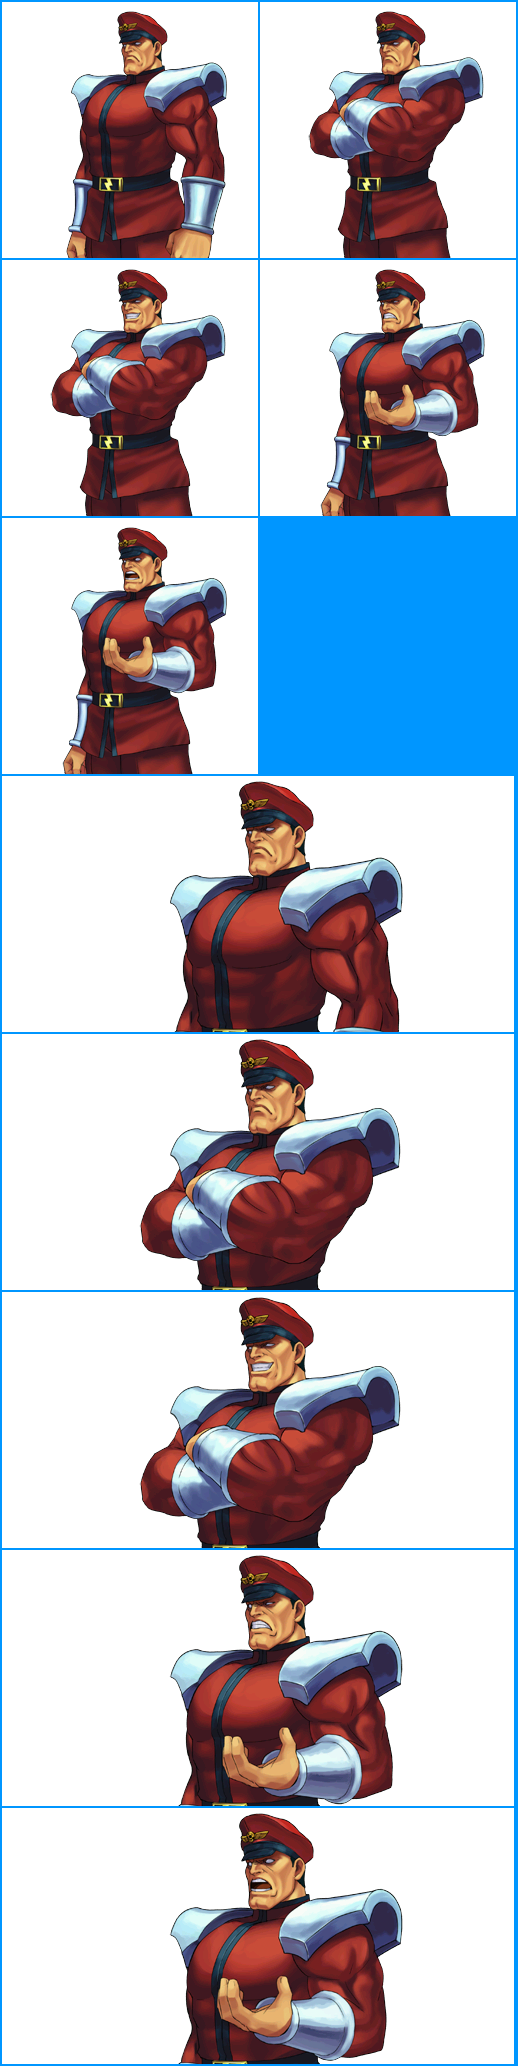 Project X Zone 2 - M. Bison